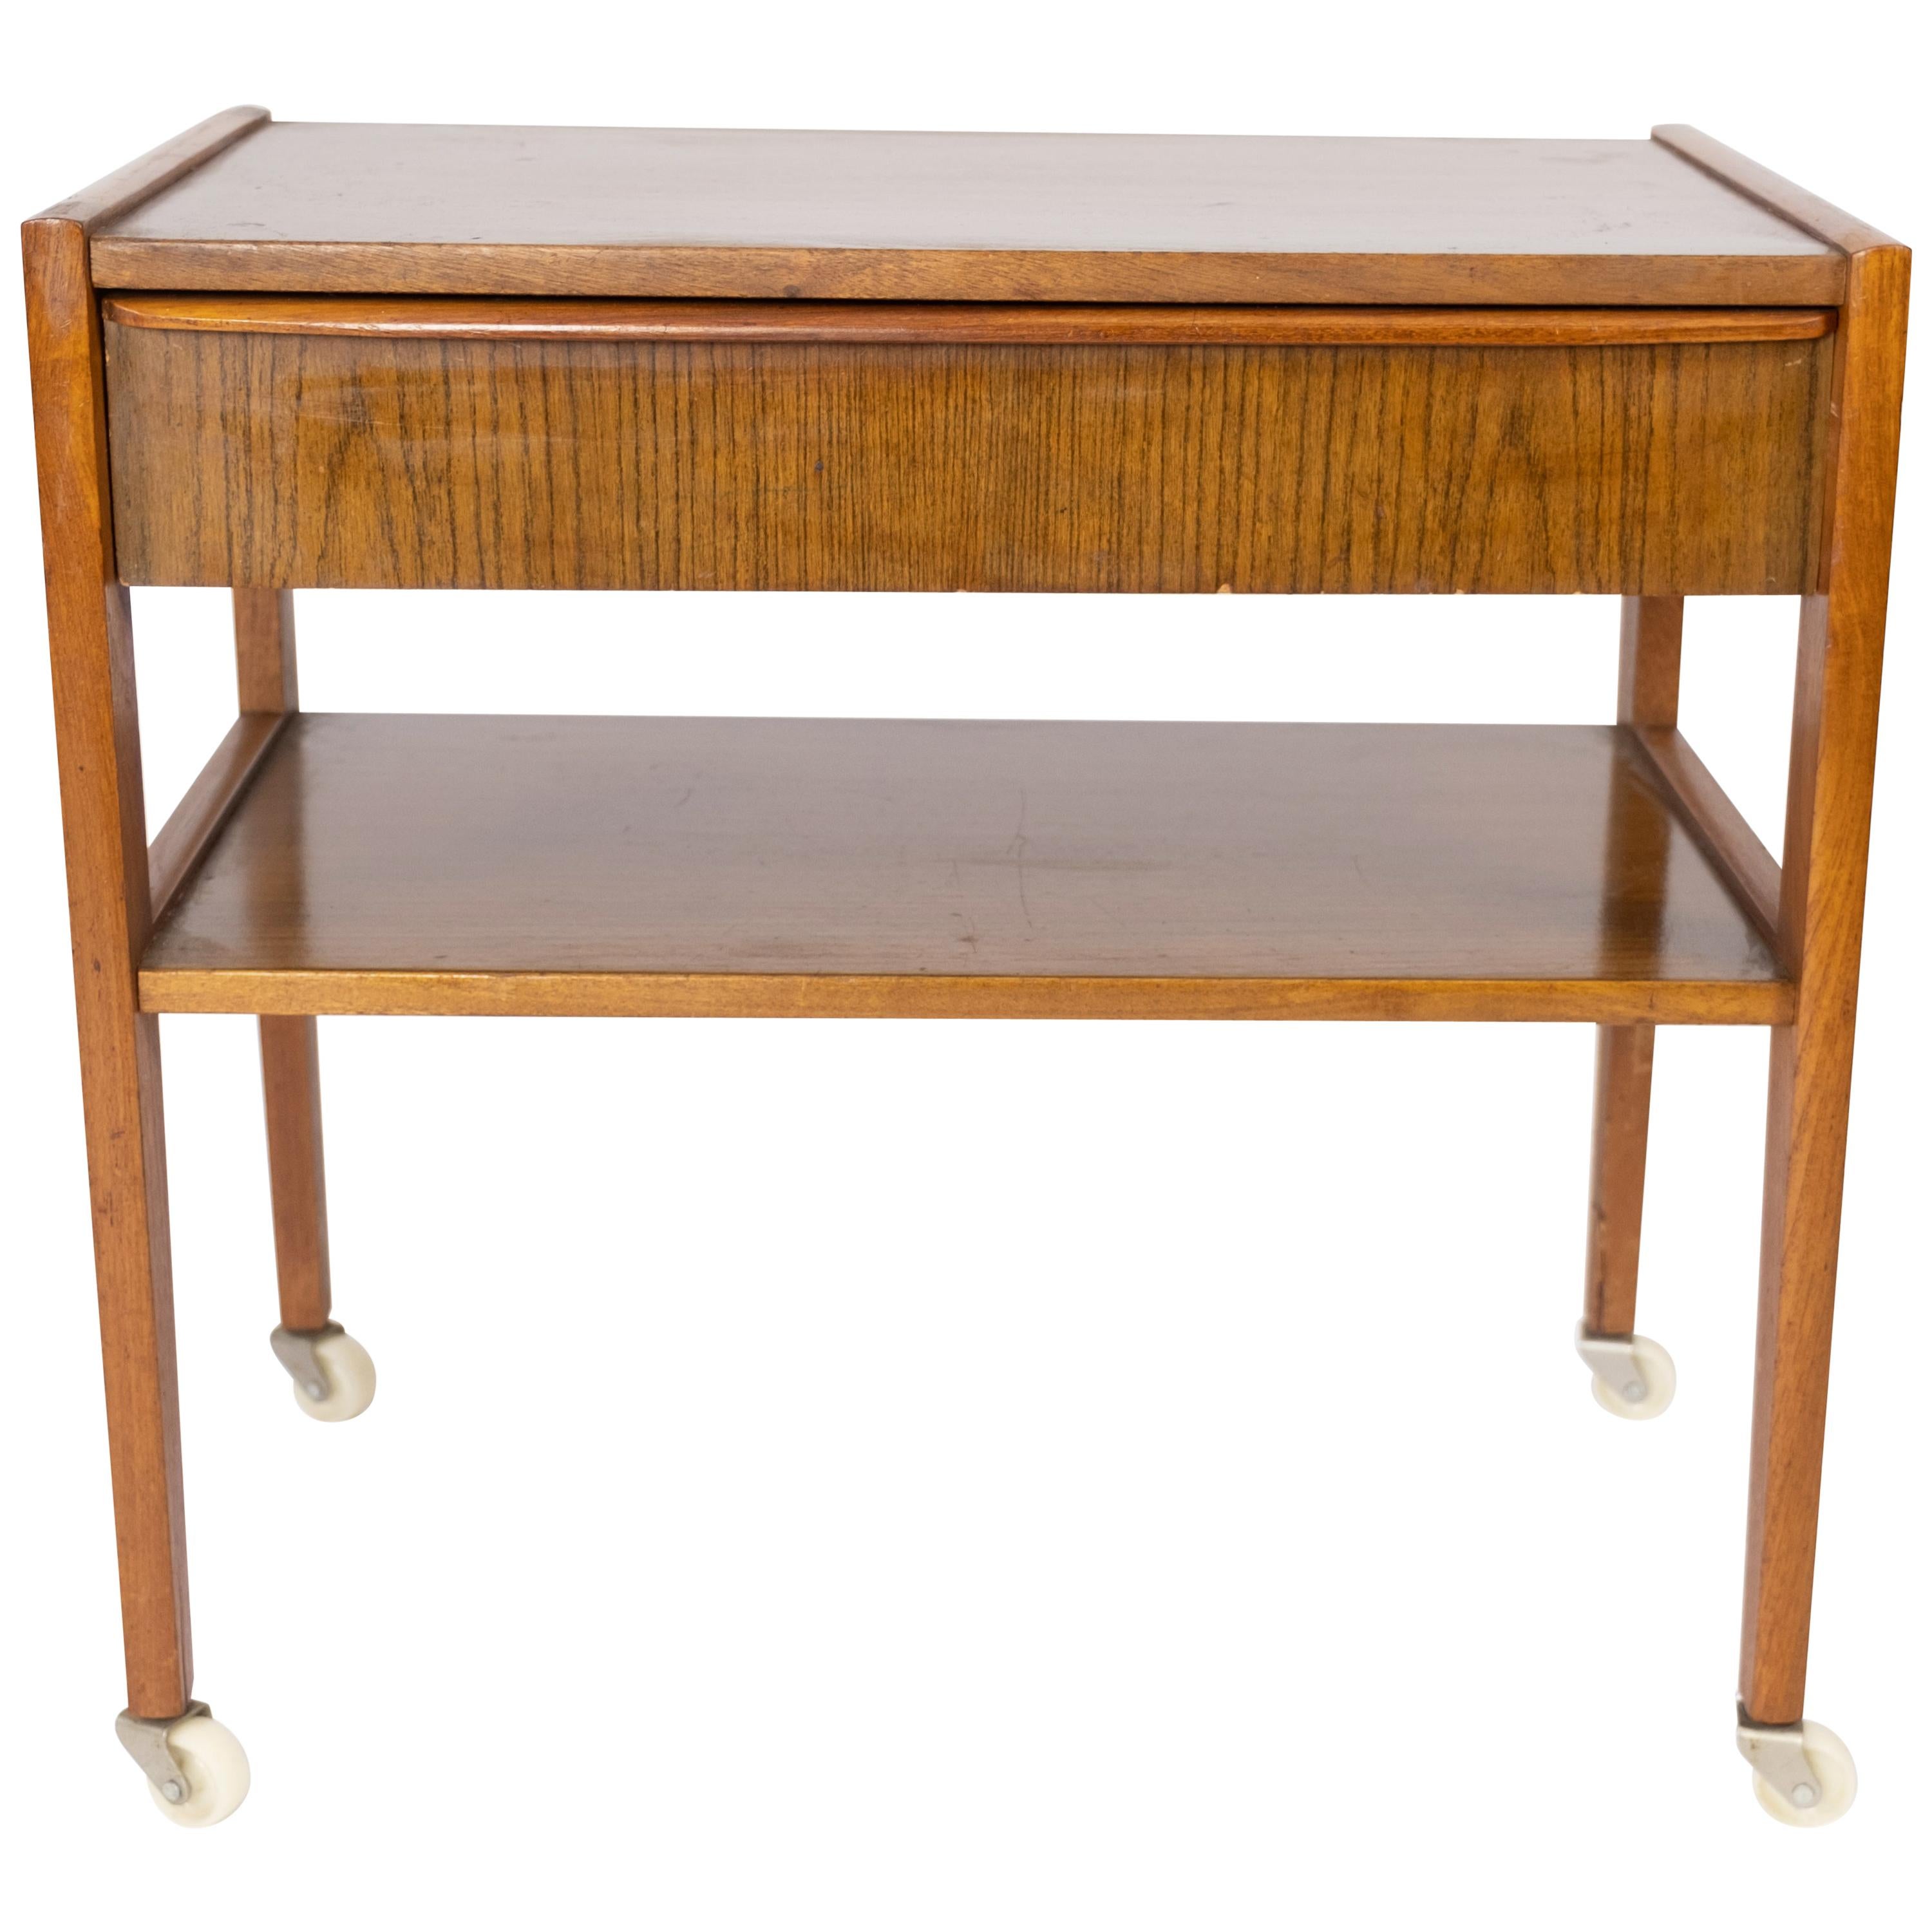 Scandinavian Modern Small Side Table with Drawer in Teak from the 1960s